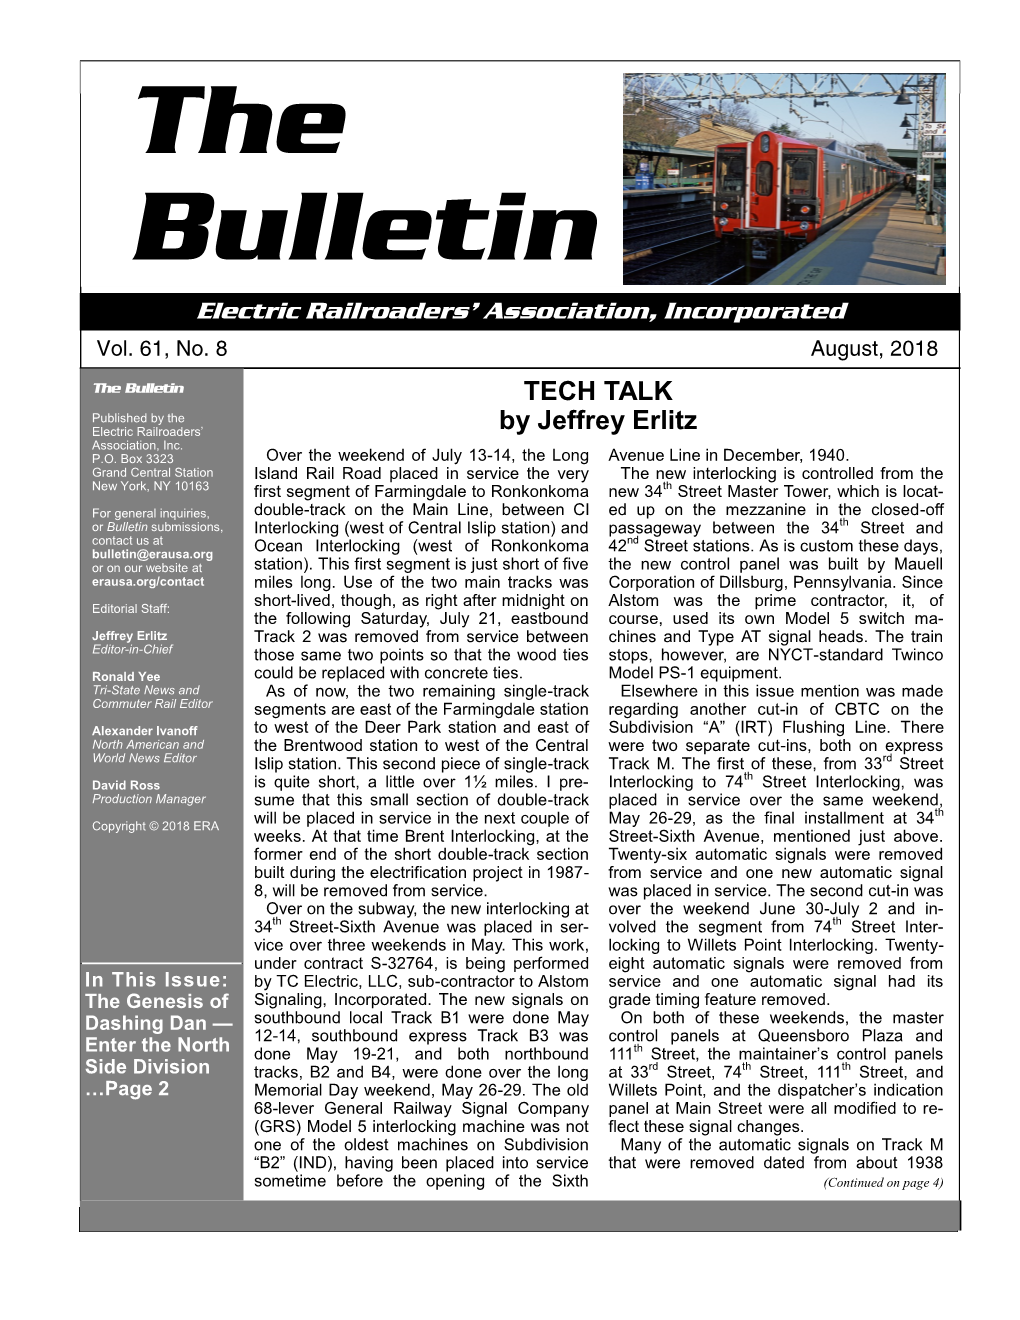 The Bulletin TECH TALK Published by the Electric Railroaders’ by Jeffrey Erlitz Association, Inc